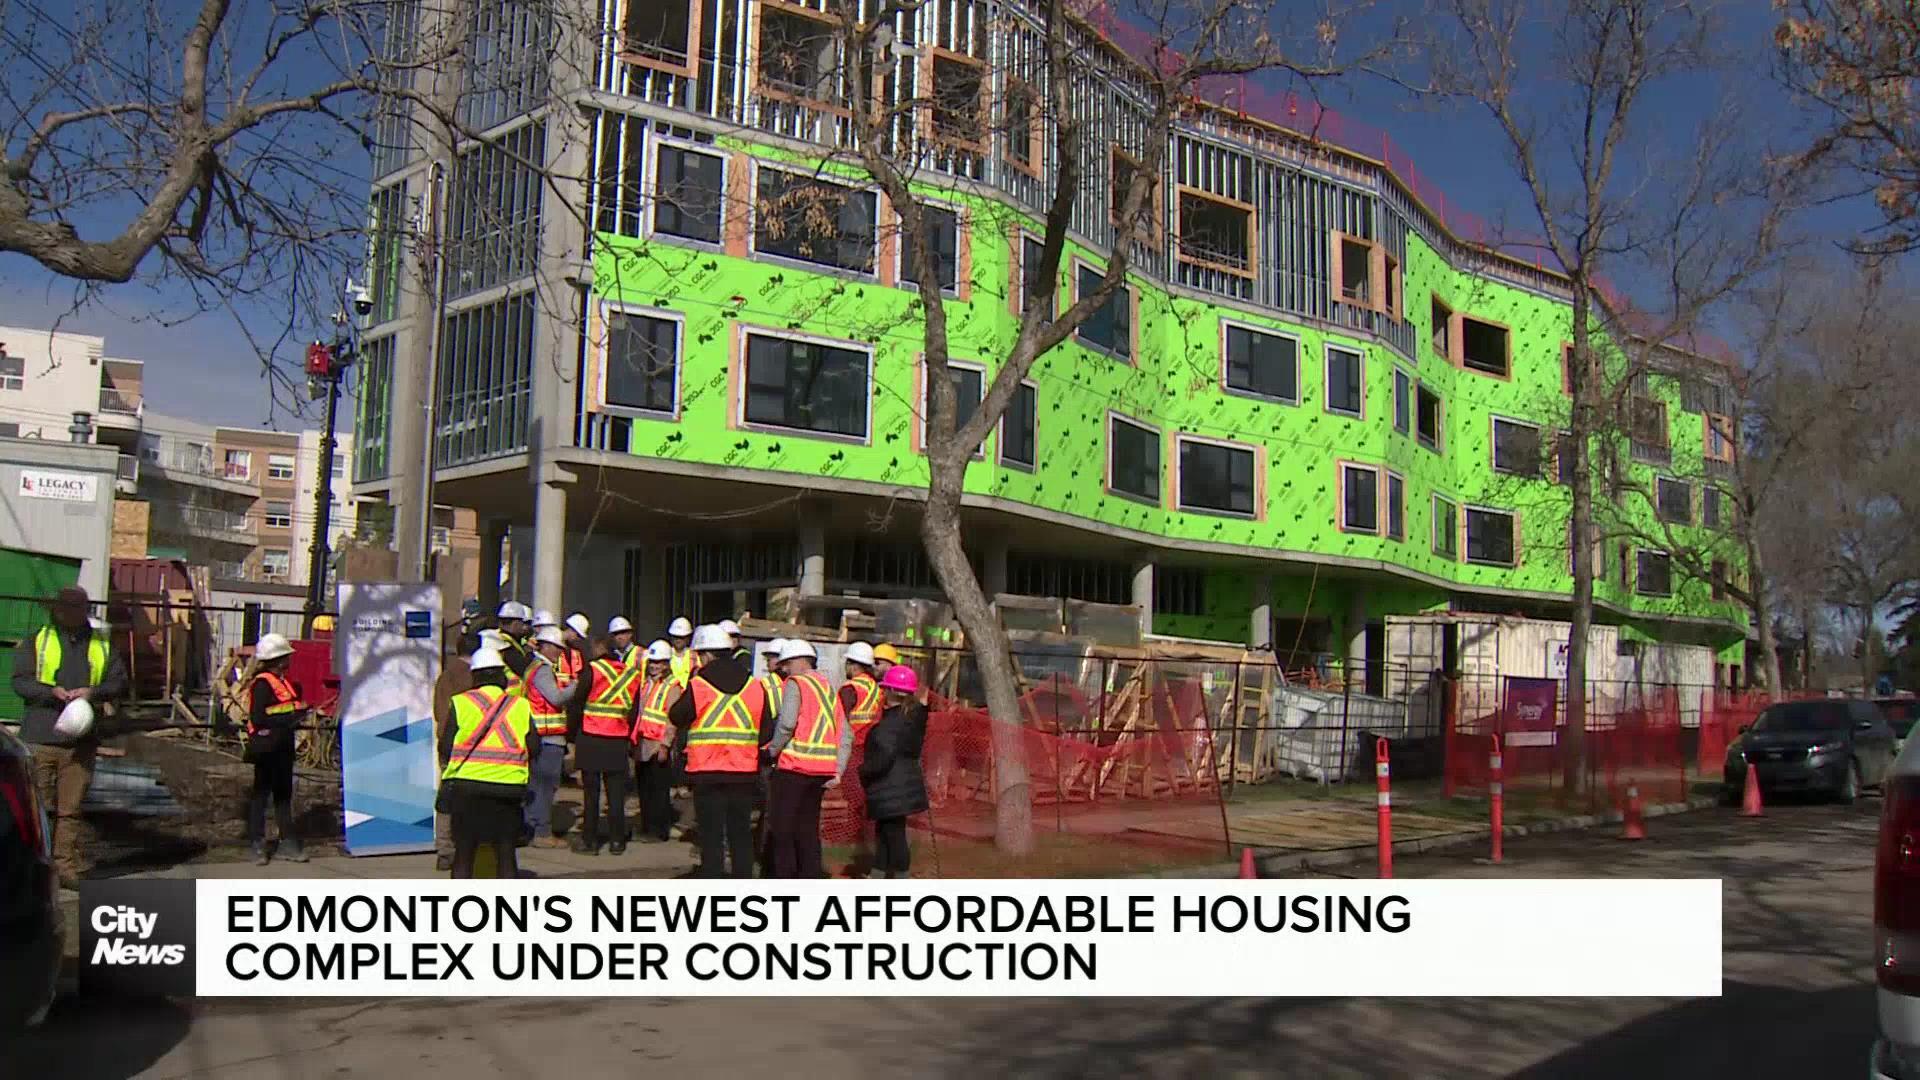 Edmonton continues fight against affordability with newest complex